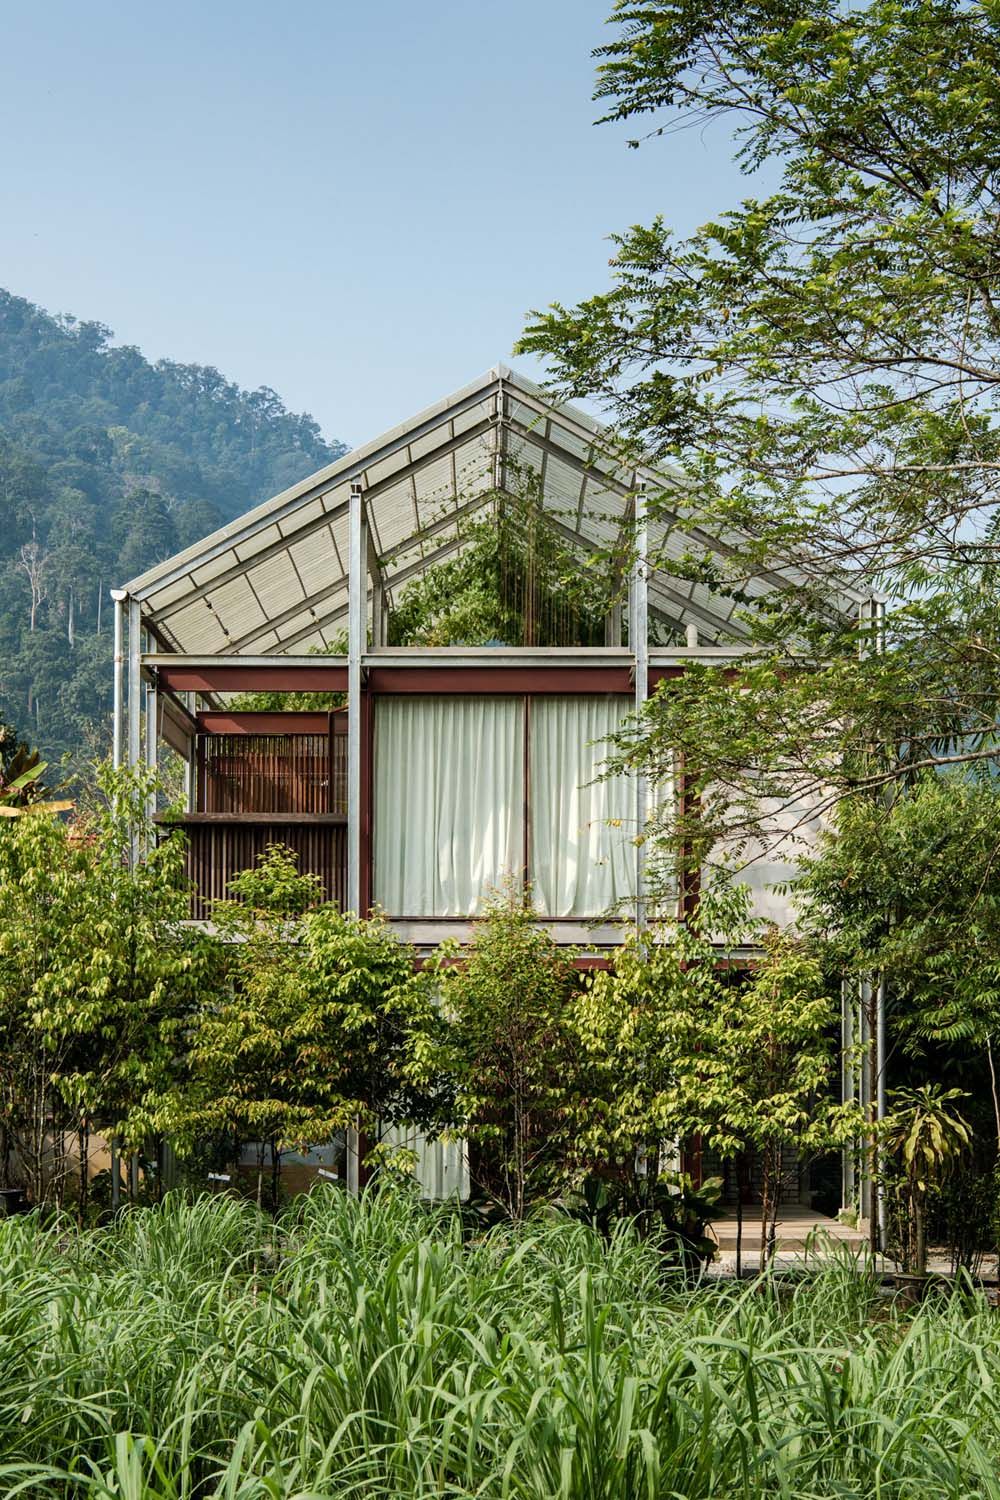 Mentahmatter Design Sets Up an Open Accommodation in the Middle of a Lush Rainforest